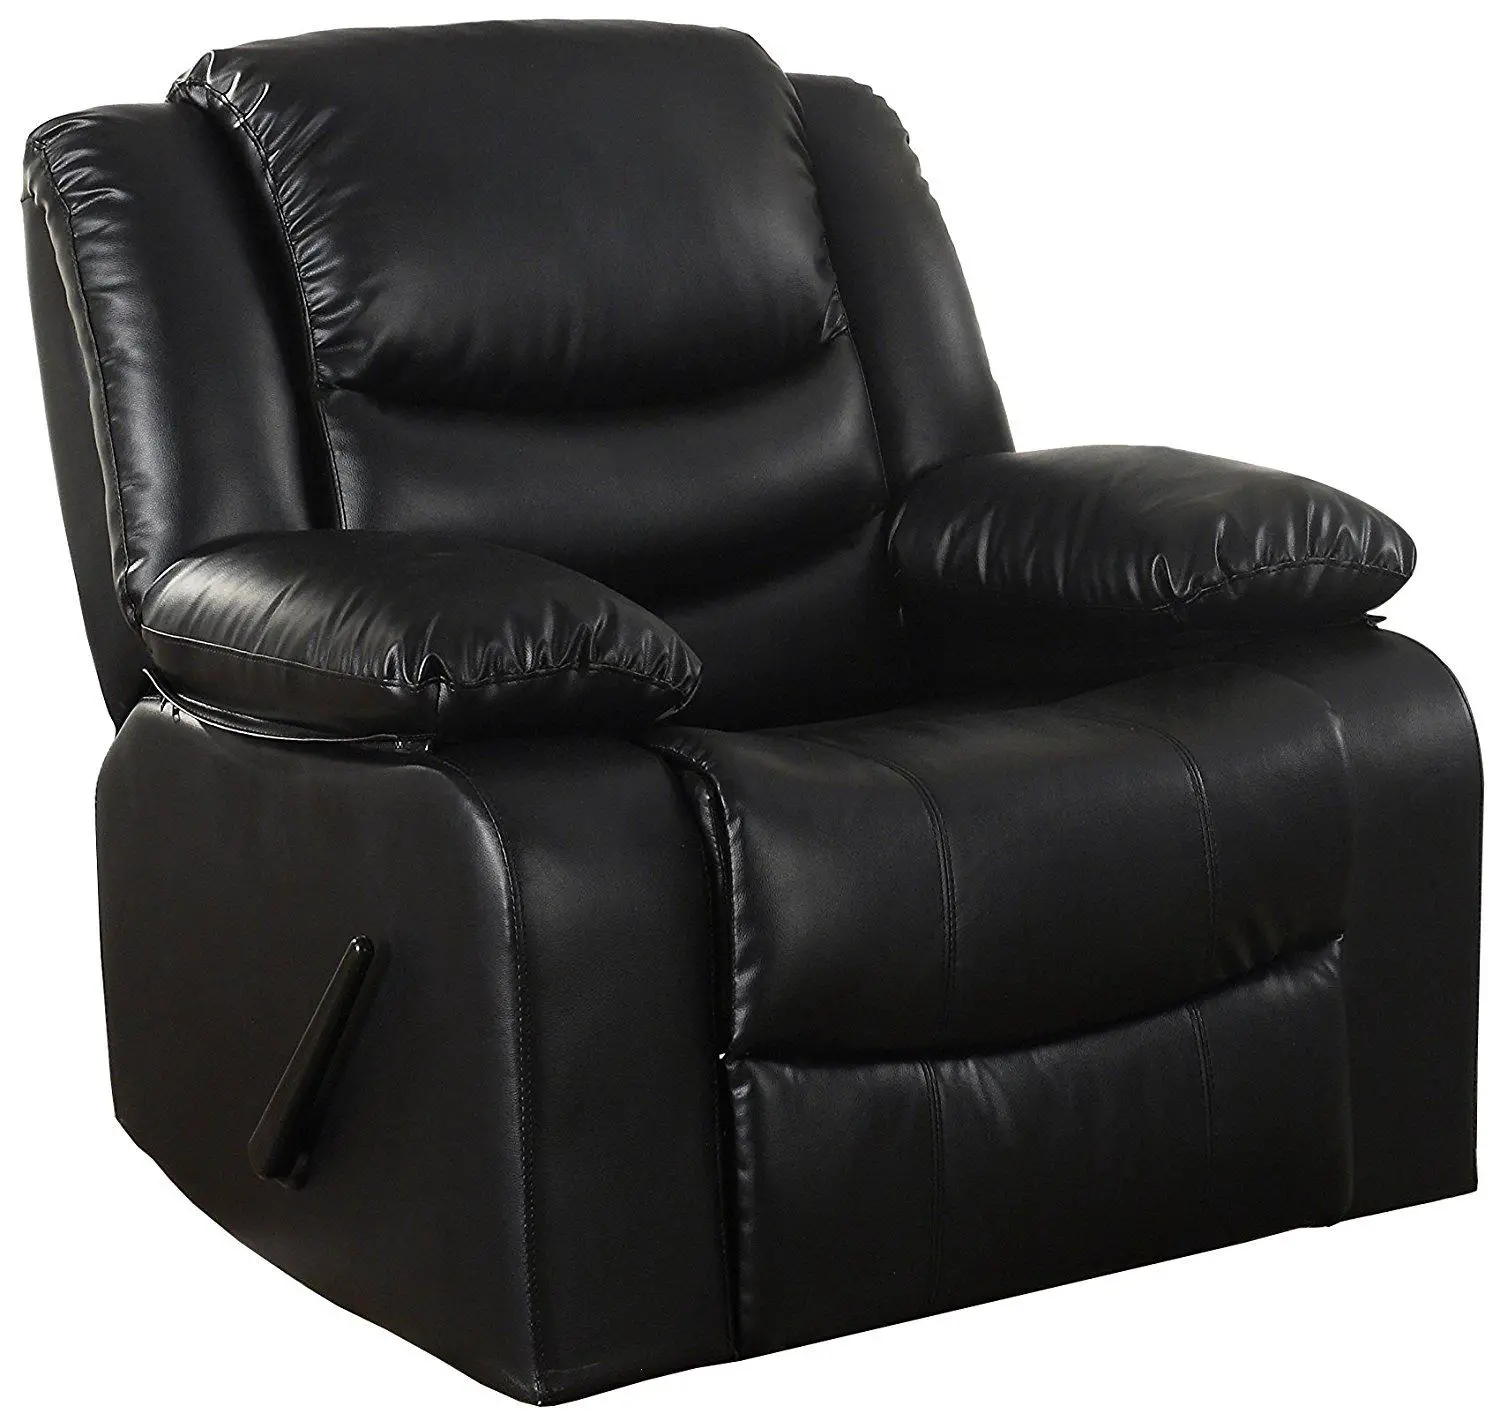 Single Seat Sofa Home Theater Seating Chair with Storage Bag Overstuffed Arms and Back Gray CANMOV Manual Leather Recliner Chair